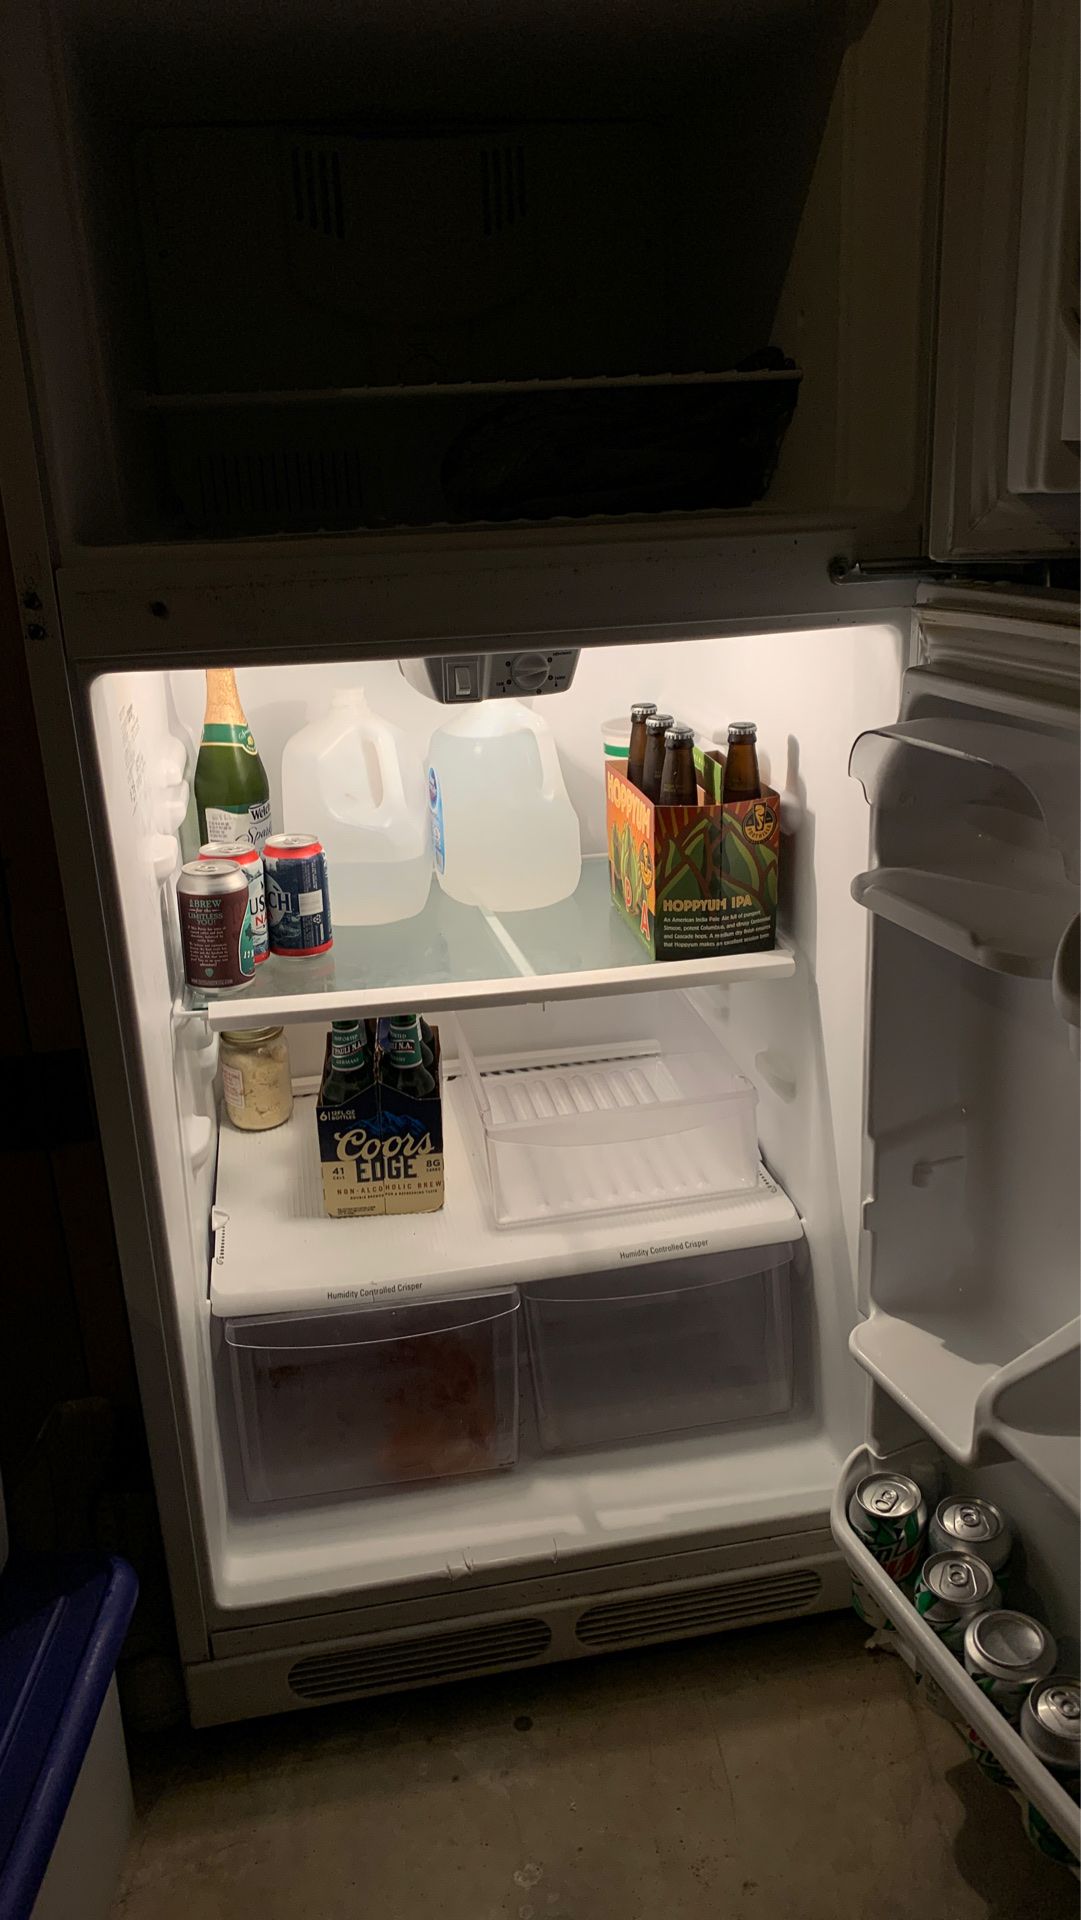 Inside of small refrigerator I am selling (some people wanted to see it